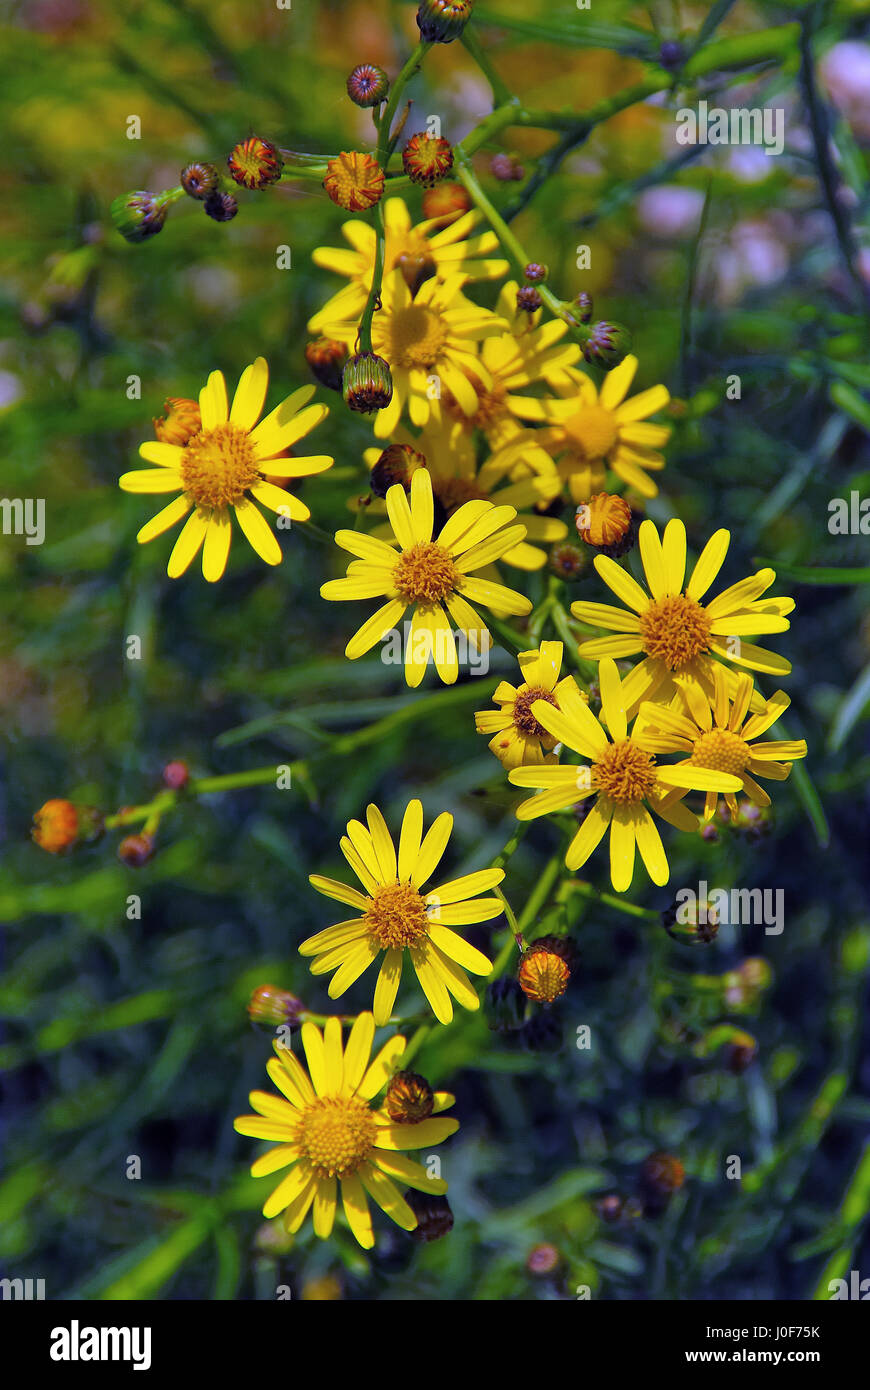 Asiago plateau, Veneto. Italy.The species Arnica montana, native to Europe, has long been used medicinally, but this use has not been substantiated. Stock Photo